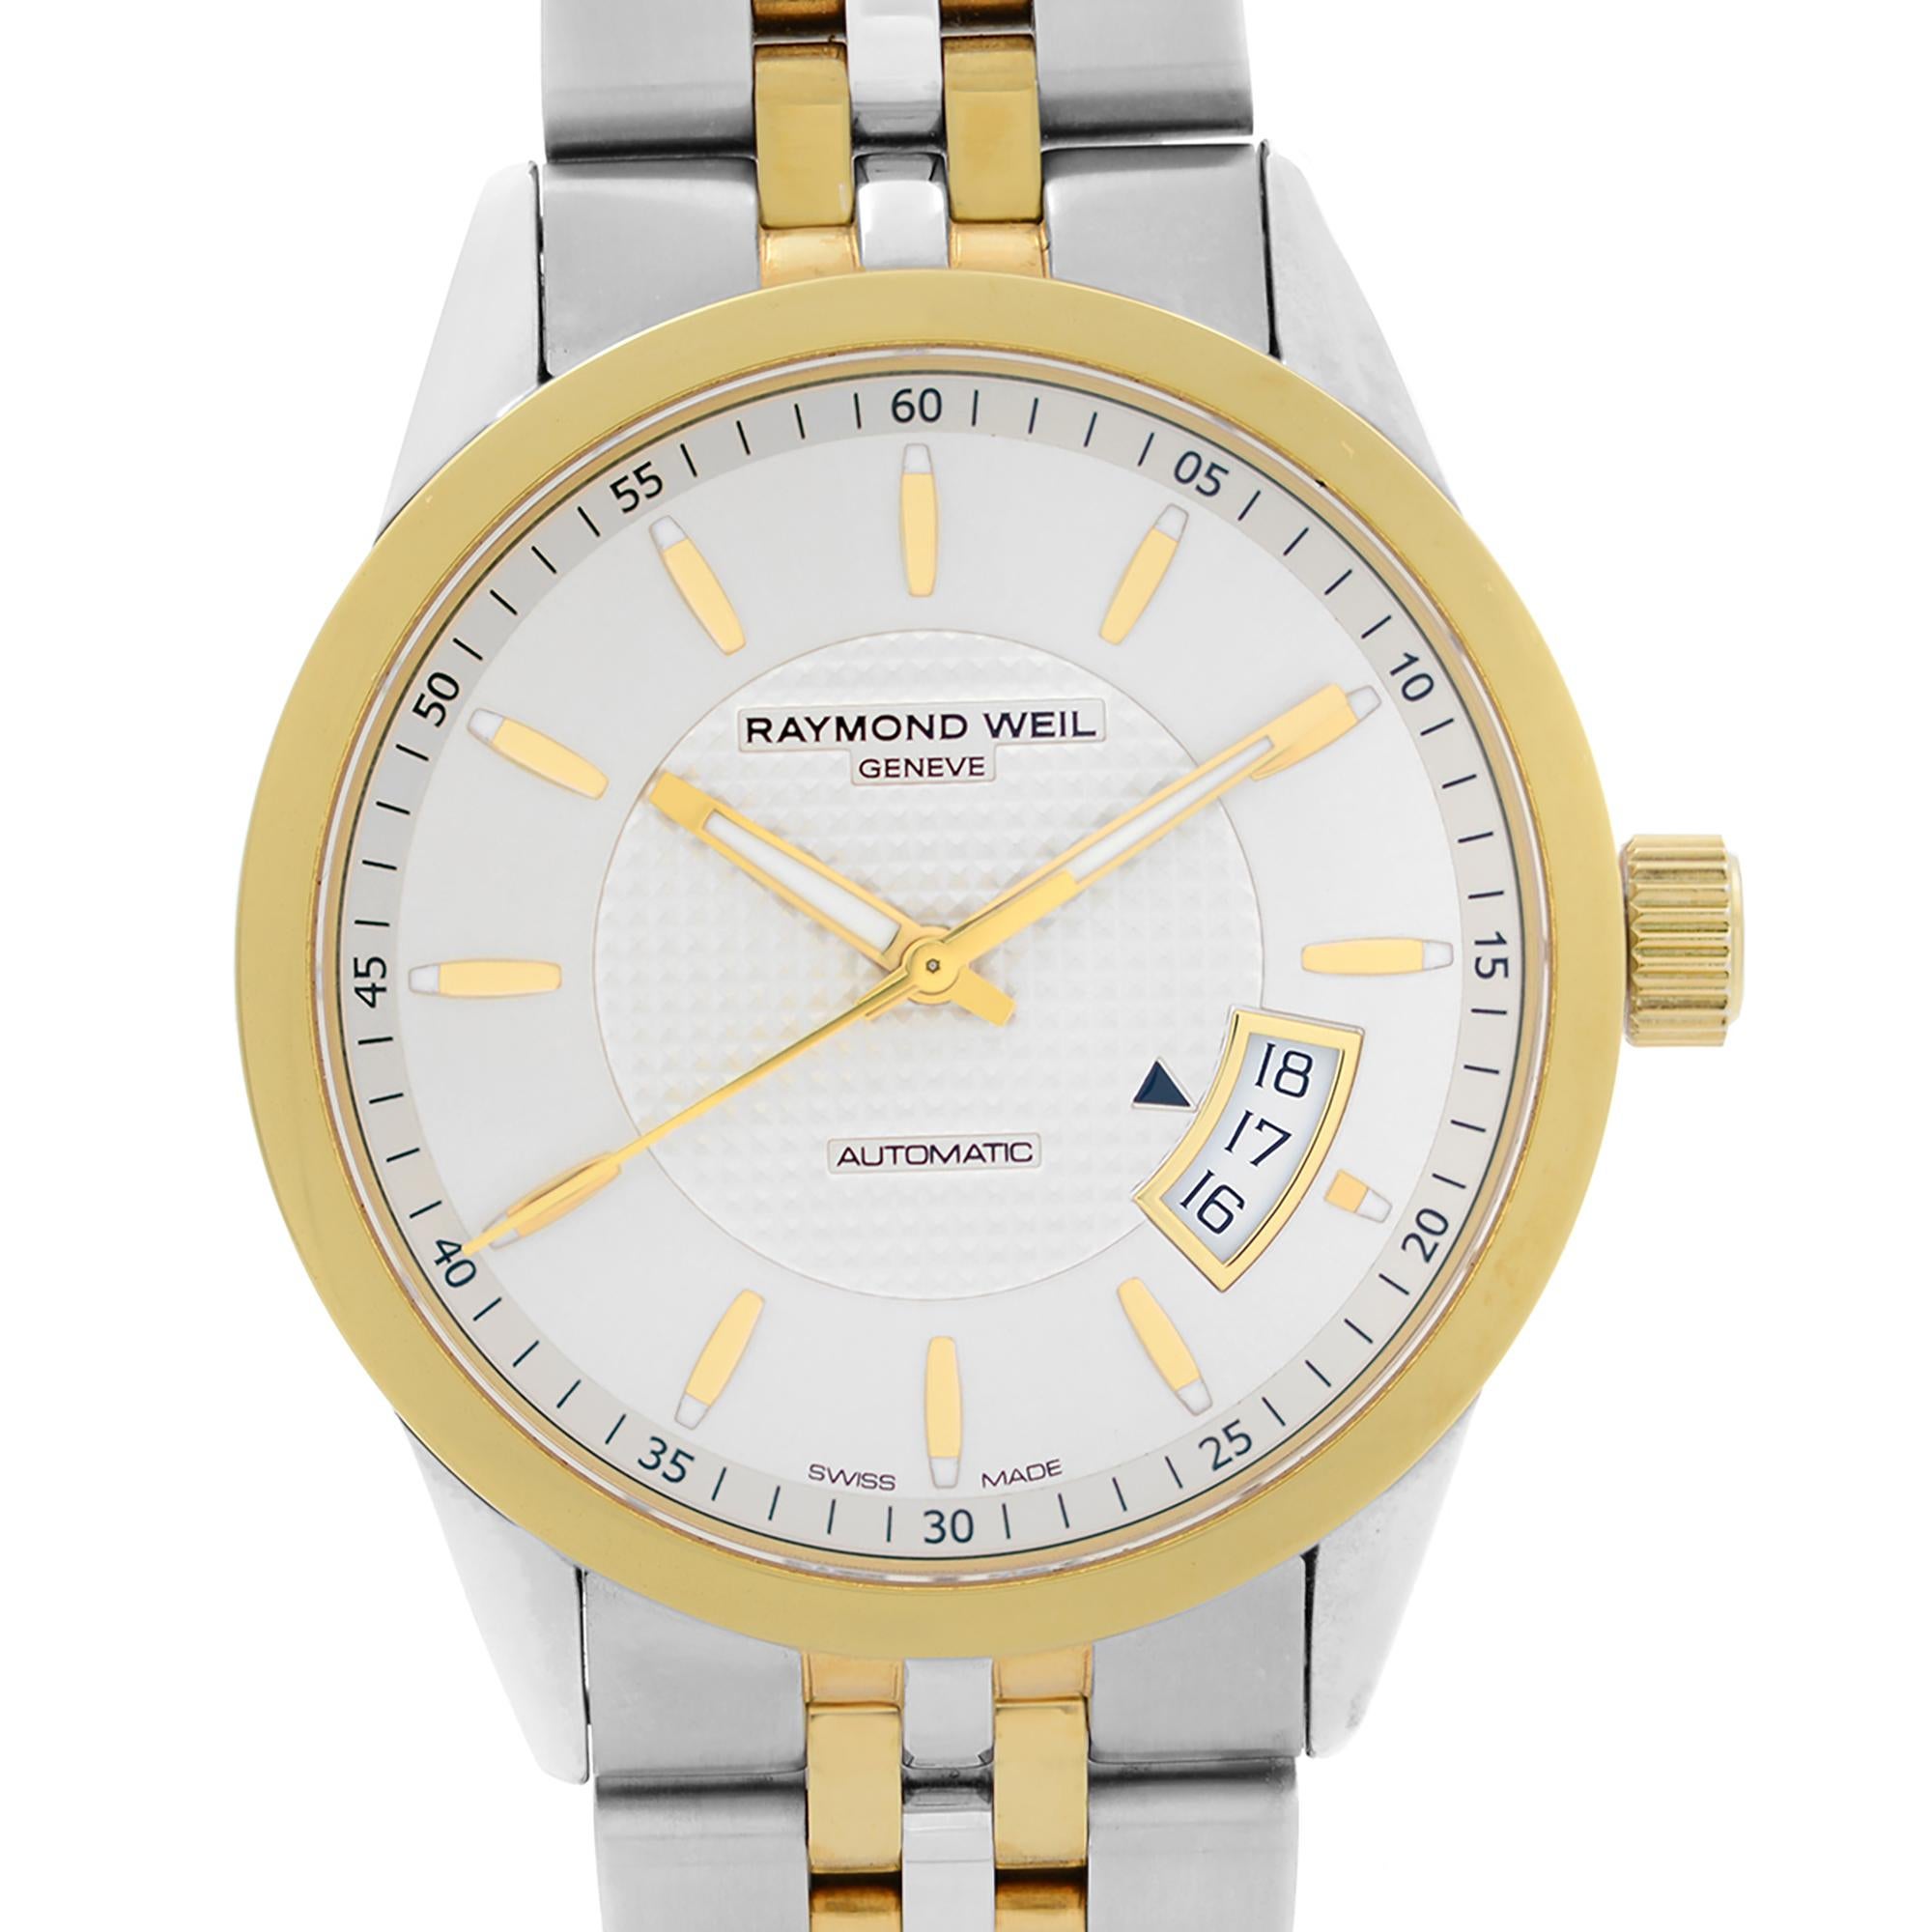 Pre Owned Raymond Weil Freelancer Steel Silver Dial Automatic Men's Watch 2770-STP-65021. The Watch Has Aftermarket Crown, Blemishes on Hands and Tiny Scratches on Gold-Tone Parts. This Beautiful Timepiece Features: Stainless Steel Case with a